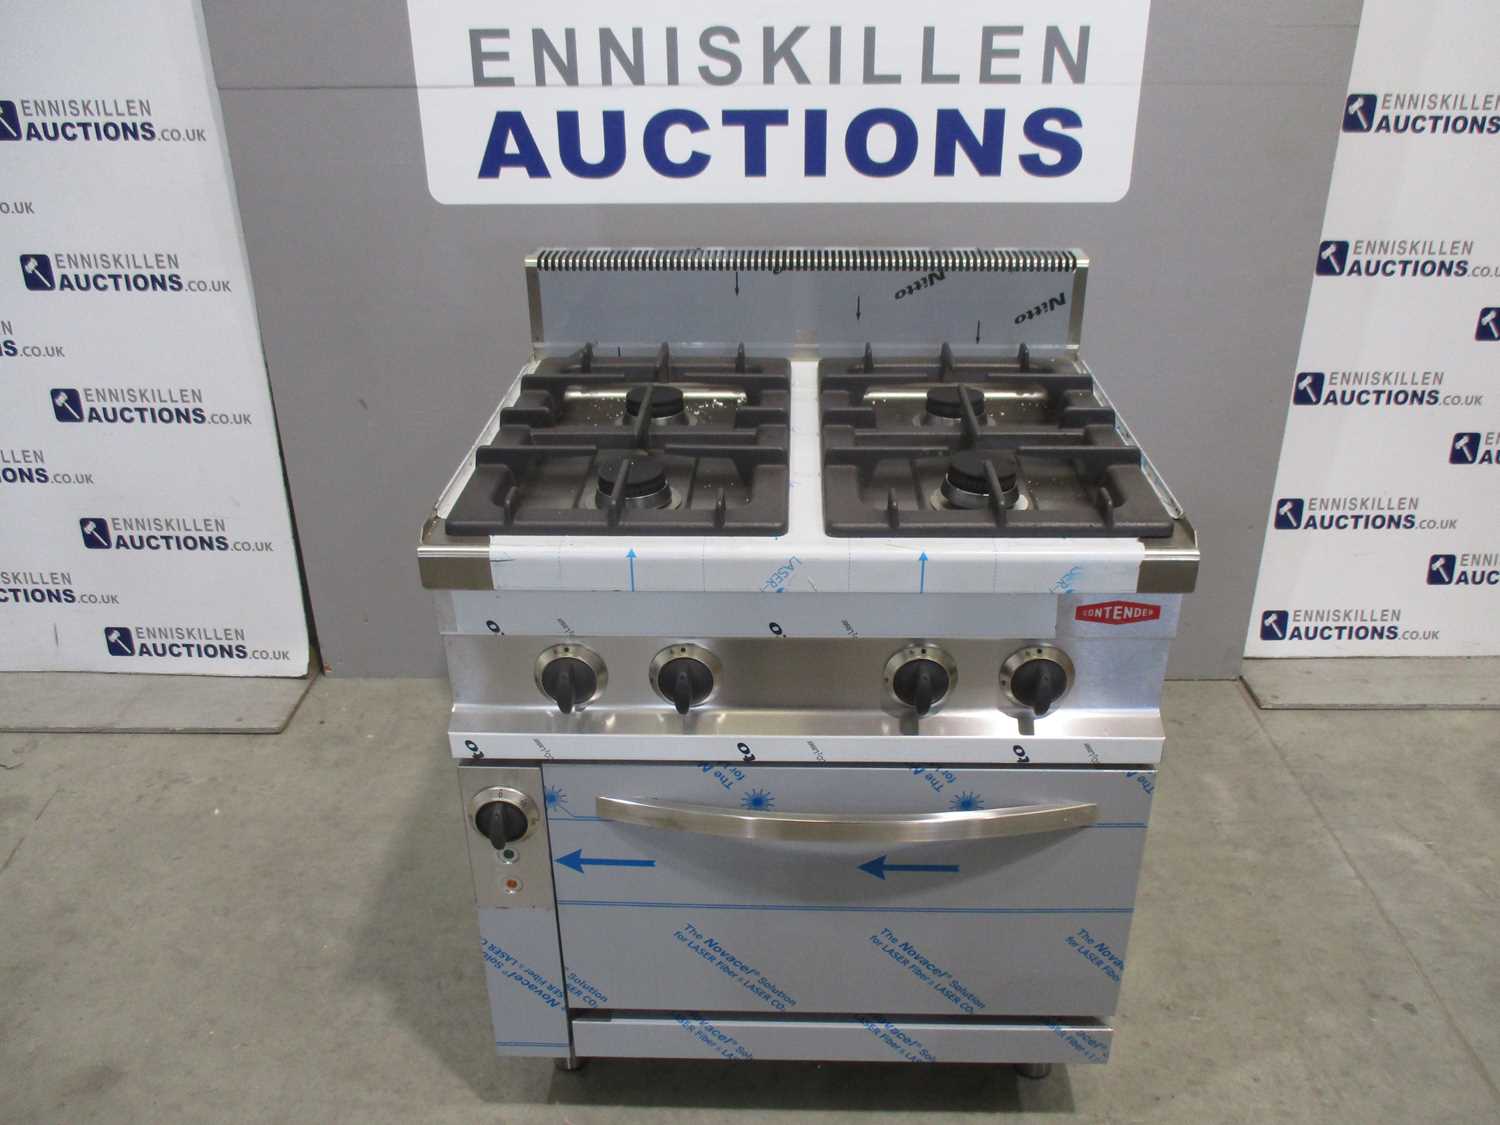 Timed Online Commercial Catering Equipment Auction